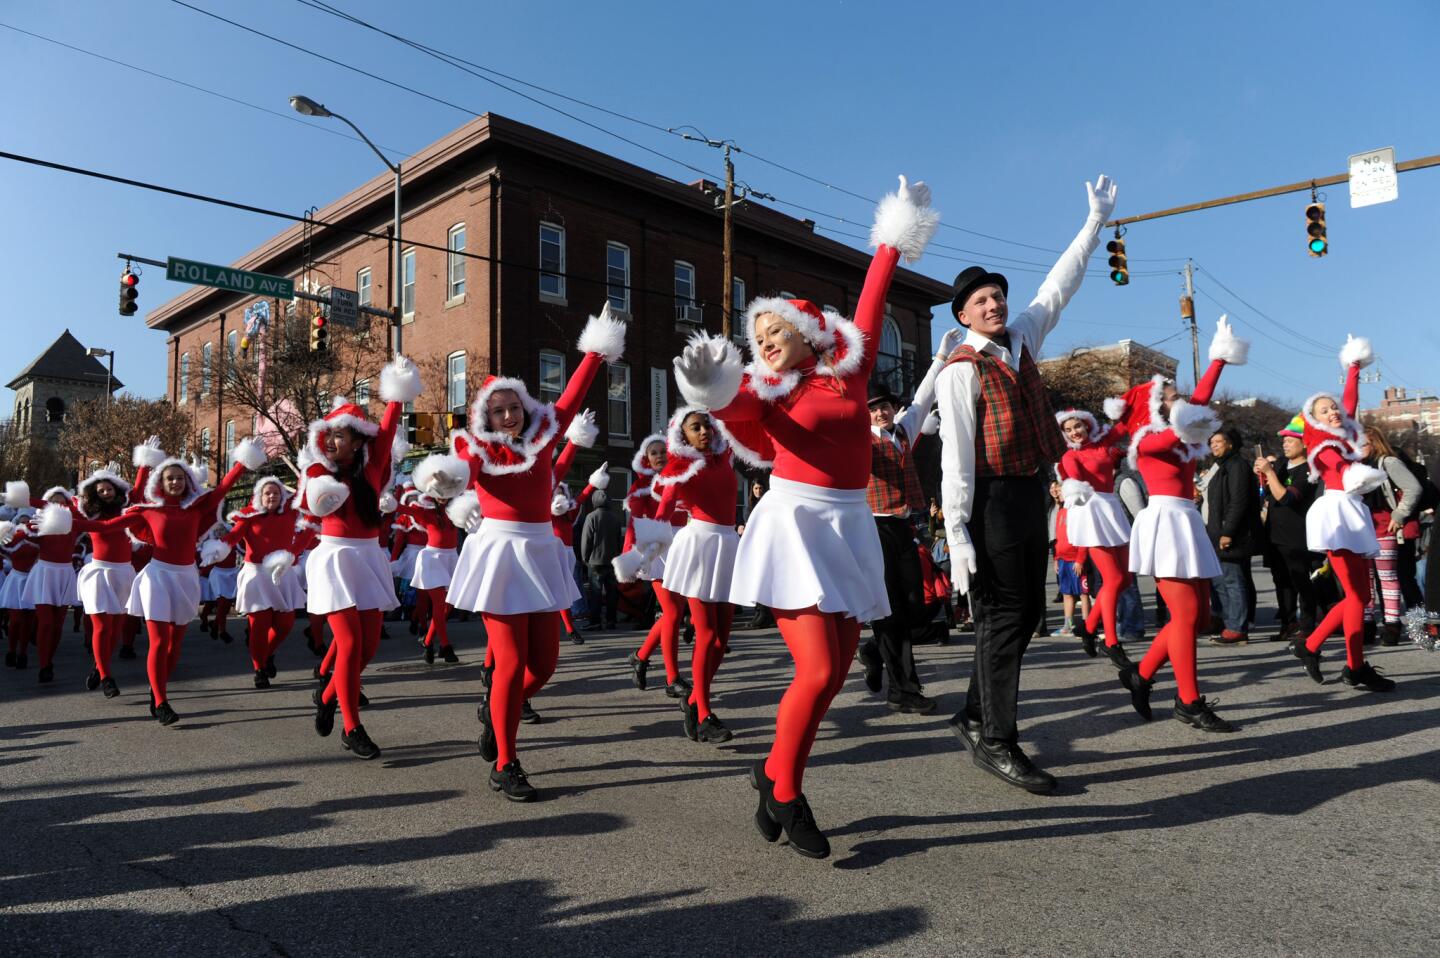 Best holiday parades in the U.S. -- No. 3